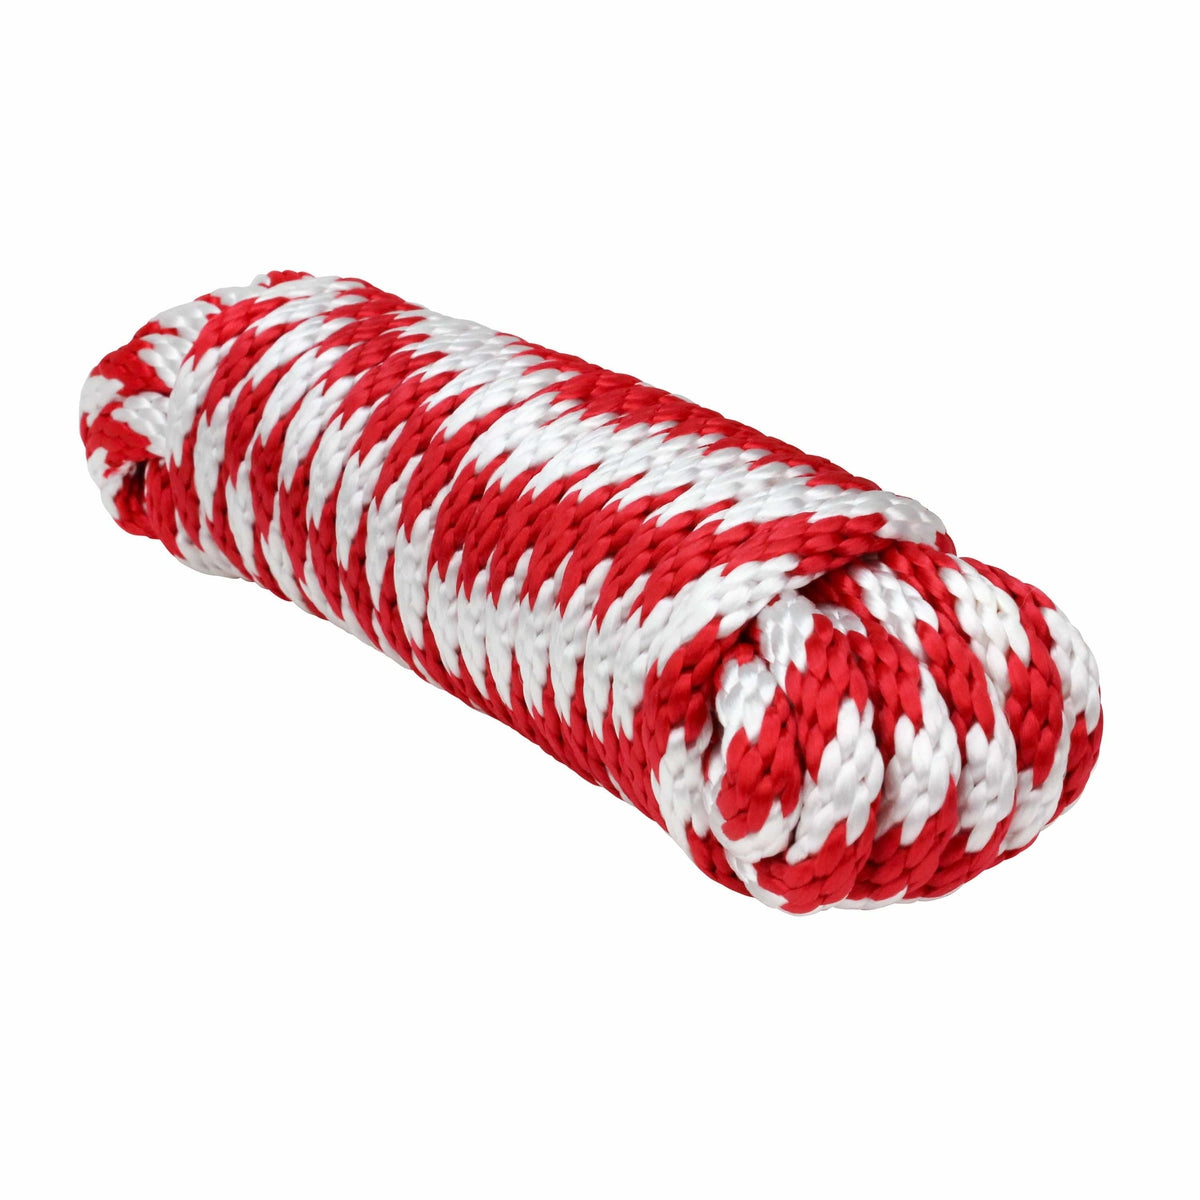 Extreme Max Solid Braid MFP Utility Rope 1/2" 25' Red/White #3008.0172